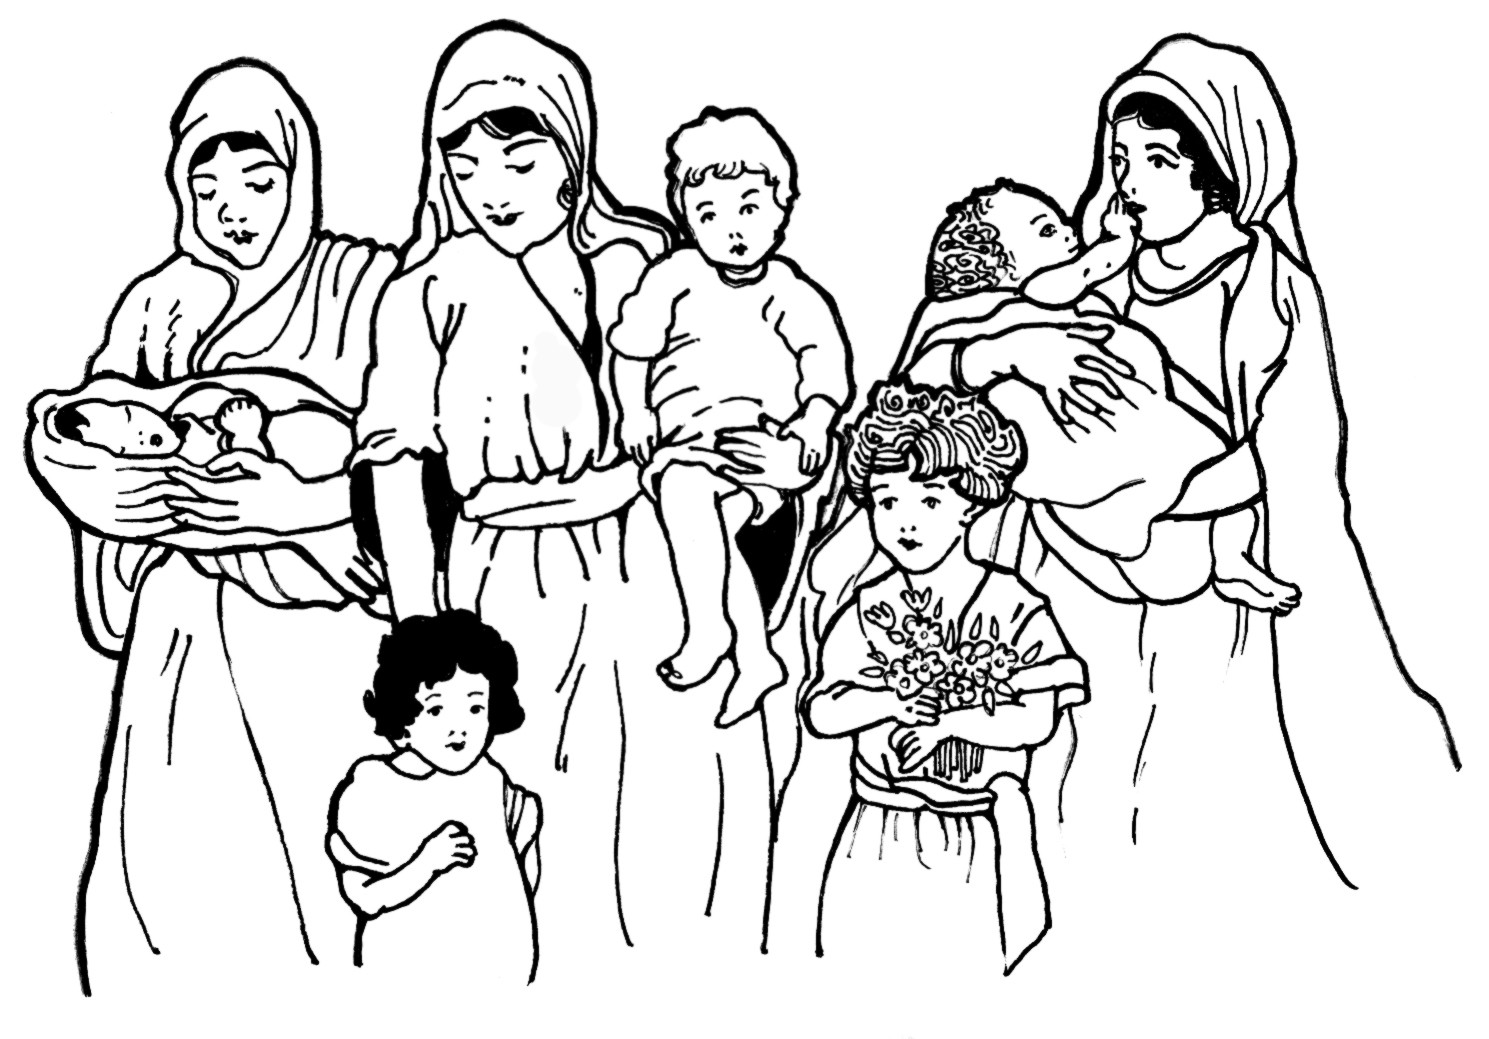 Kids Bible Coloring Page
 Mothers and Children From the Bible